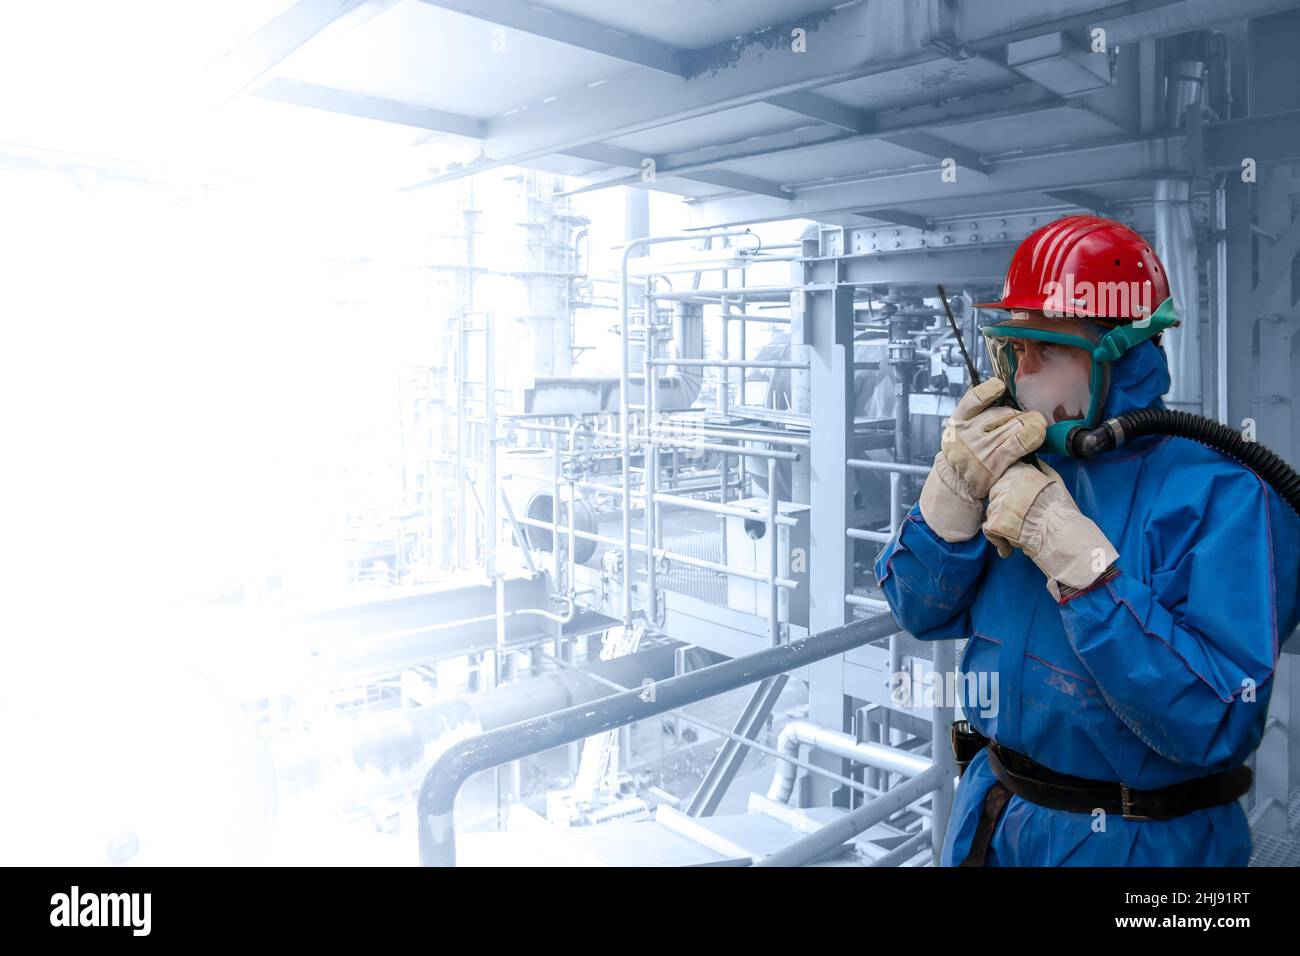 Chemical worker in full personal chemical protection, talking into a walkie-talkie. Left side of image fading out for editors purpose. Stock Photo